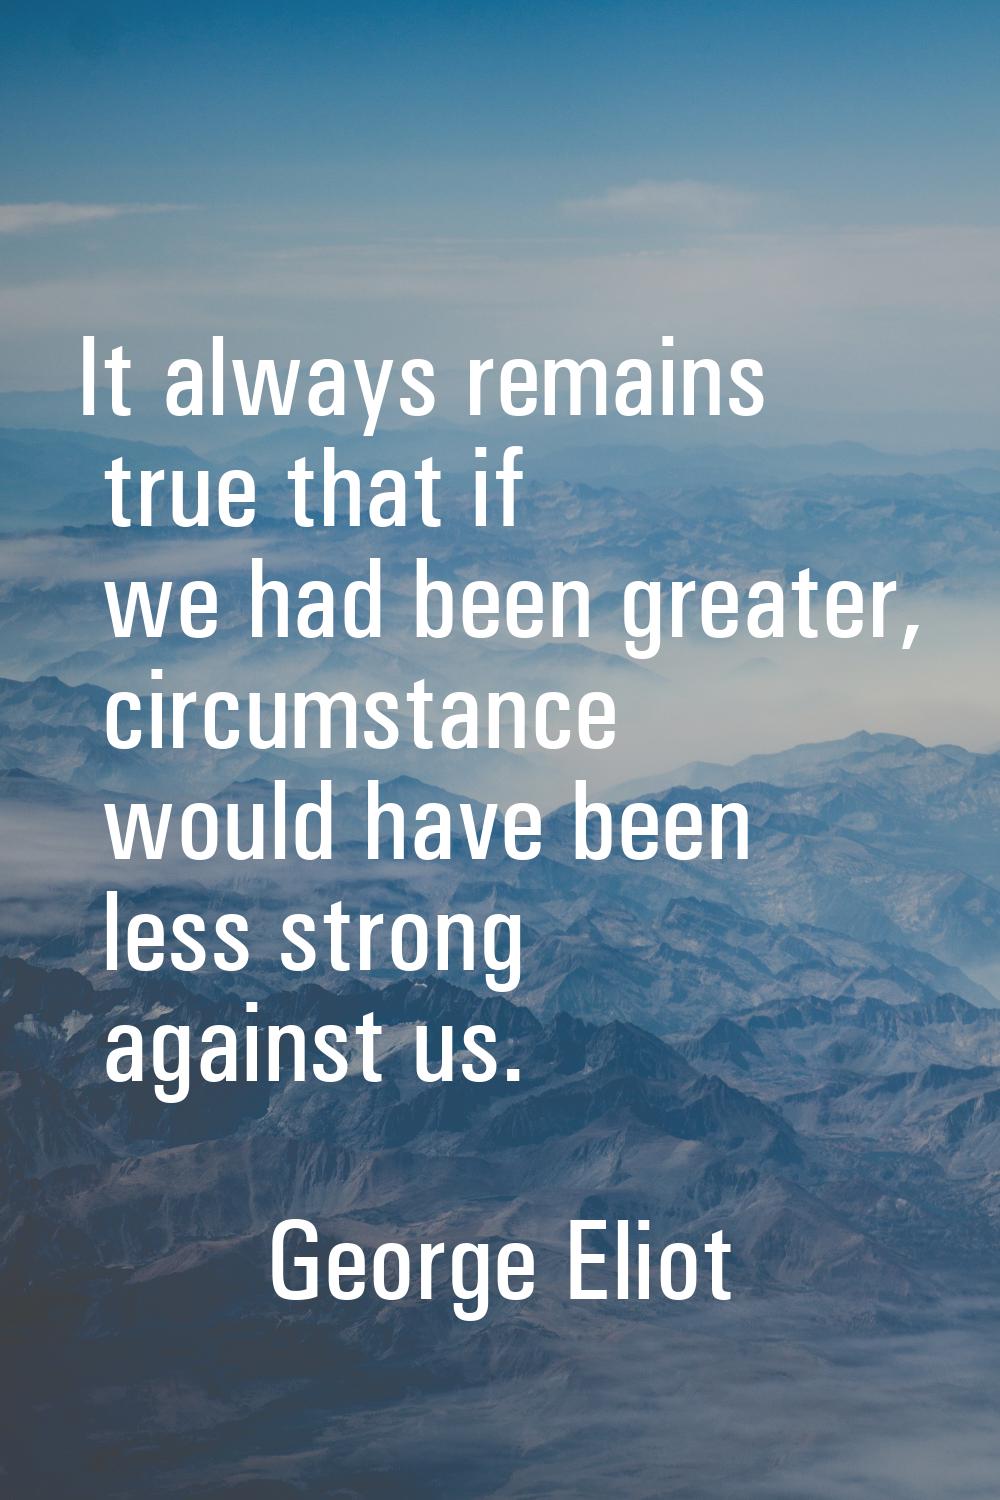 It always remains true that if we had been greater, circumstance would have been less strong agains